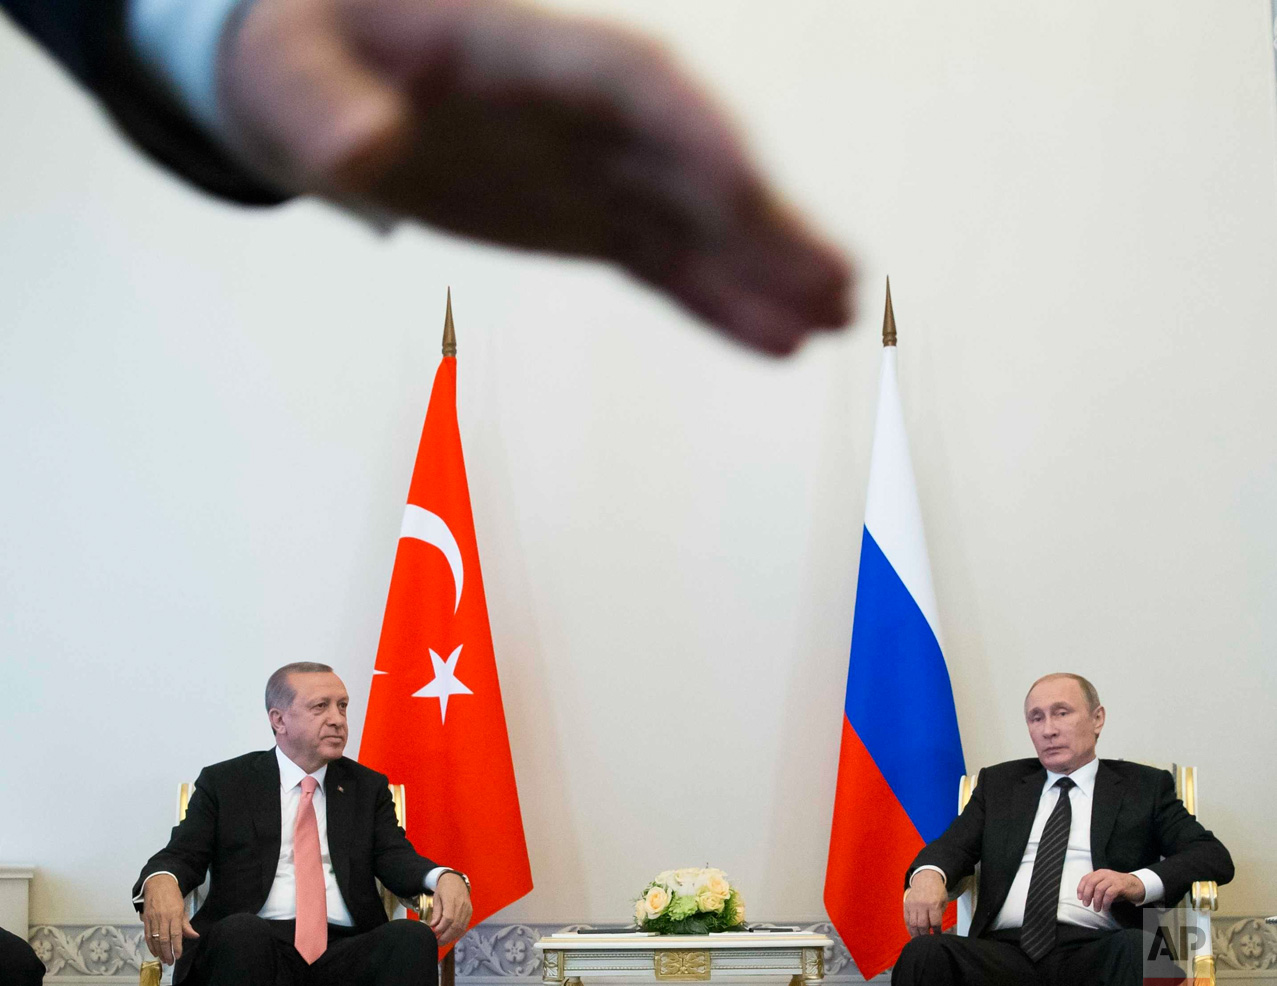  In this Tuesday, Aug. 9, 2016 photo, Russian President Vladimir Putin, right, and Turkish President Recep Tayyip Erdogan talk during their meeting, as a security member tries to stop photographers taking pictures, in the Konstantin palace outside St